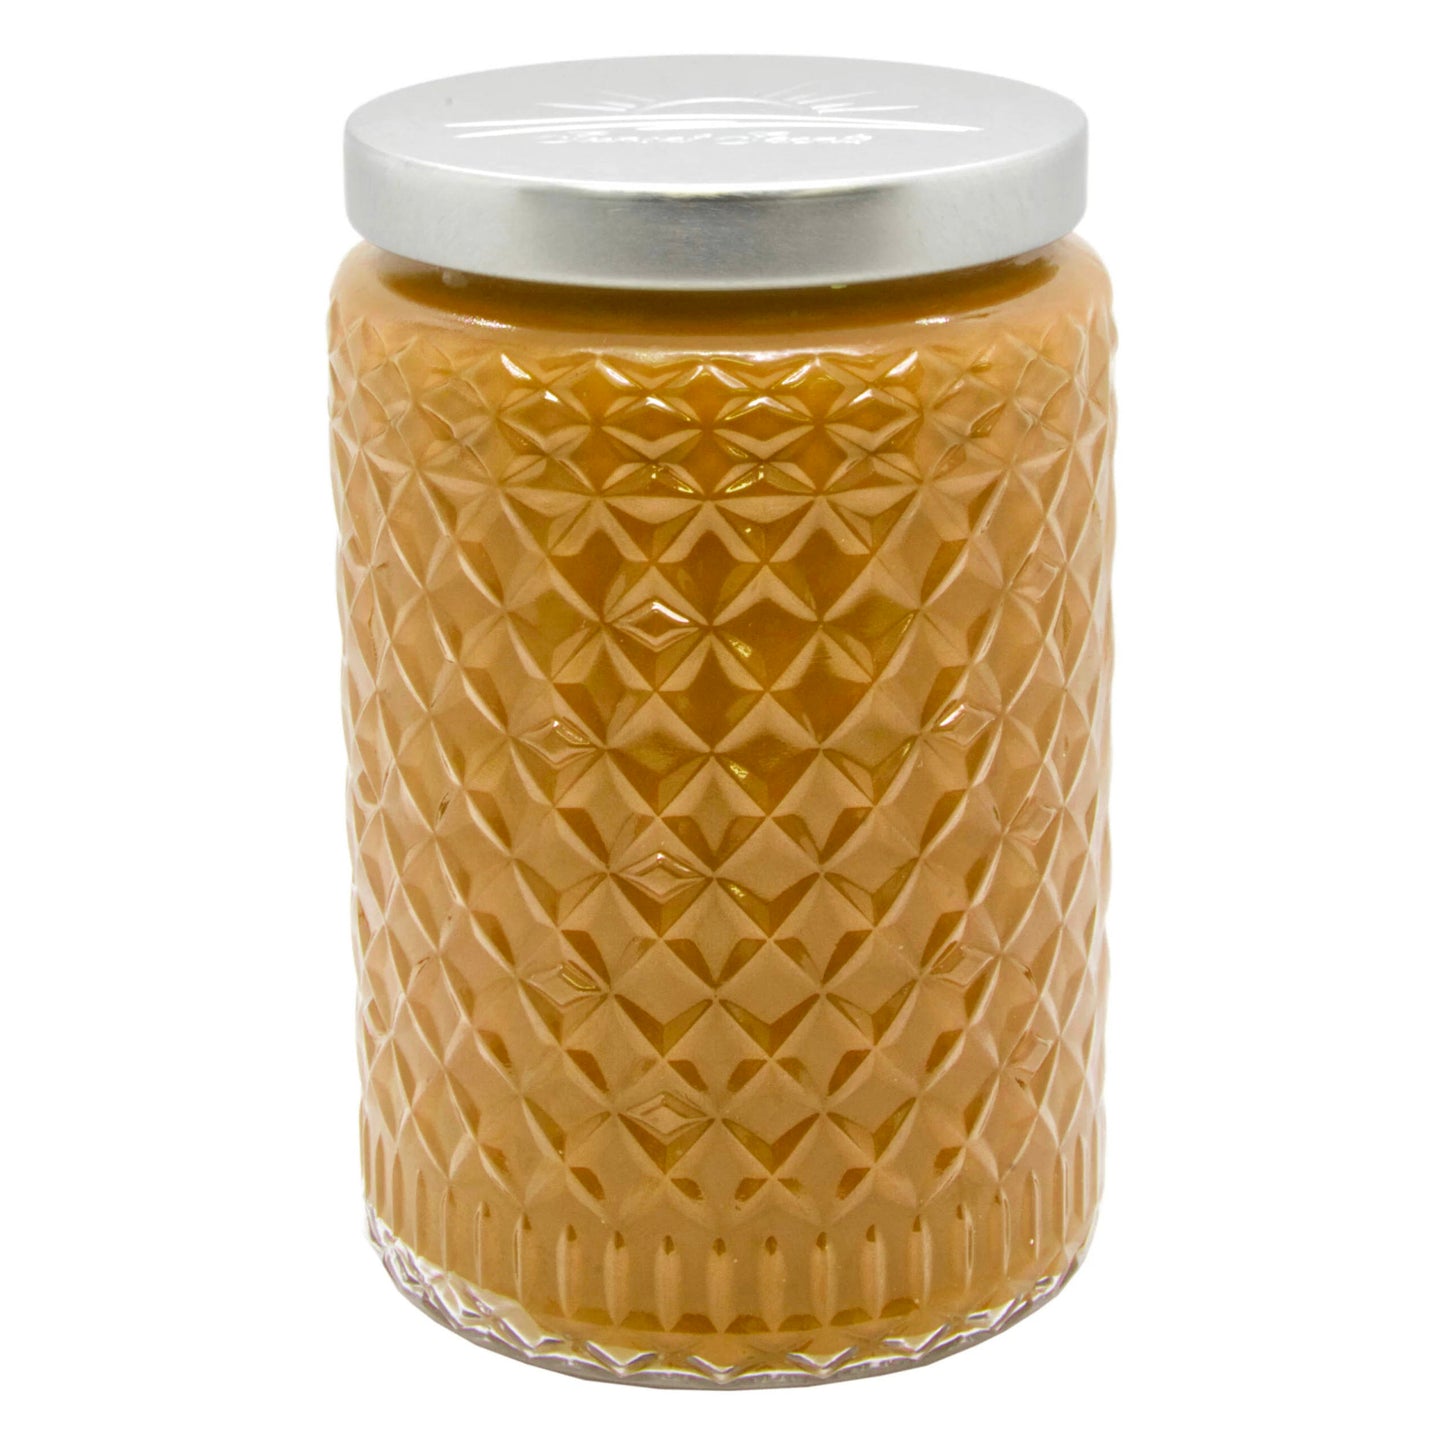 Amber Vanilla Scented Candle 24oz